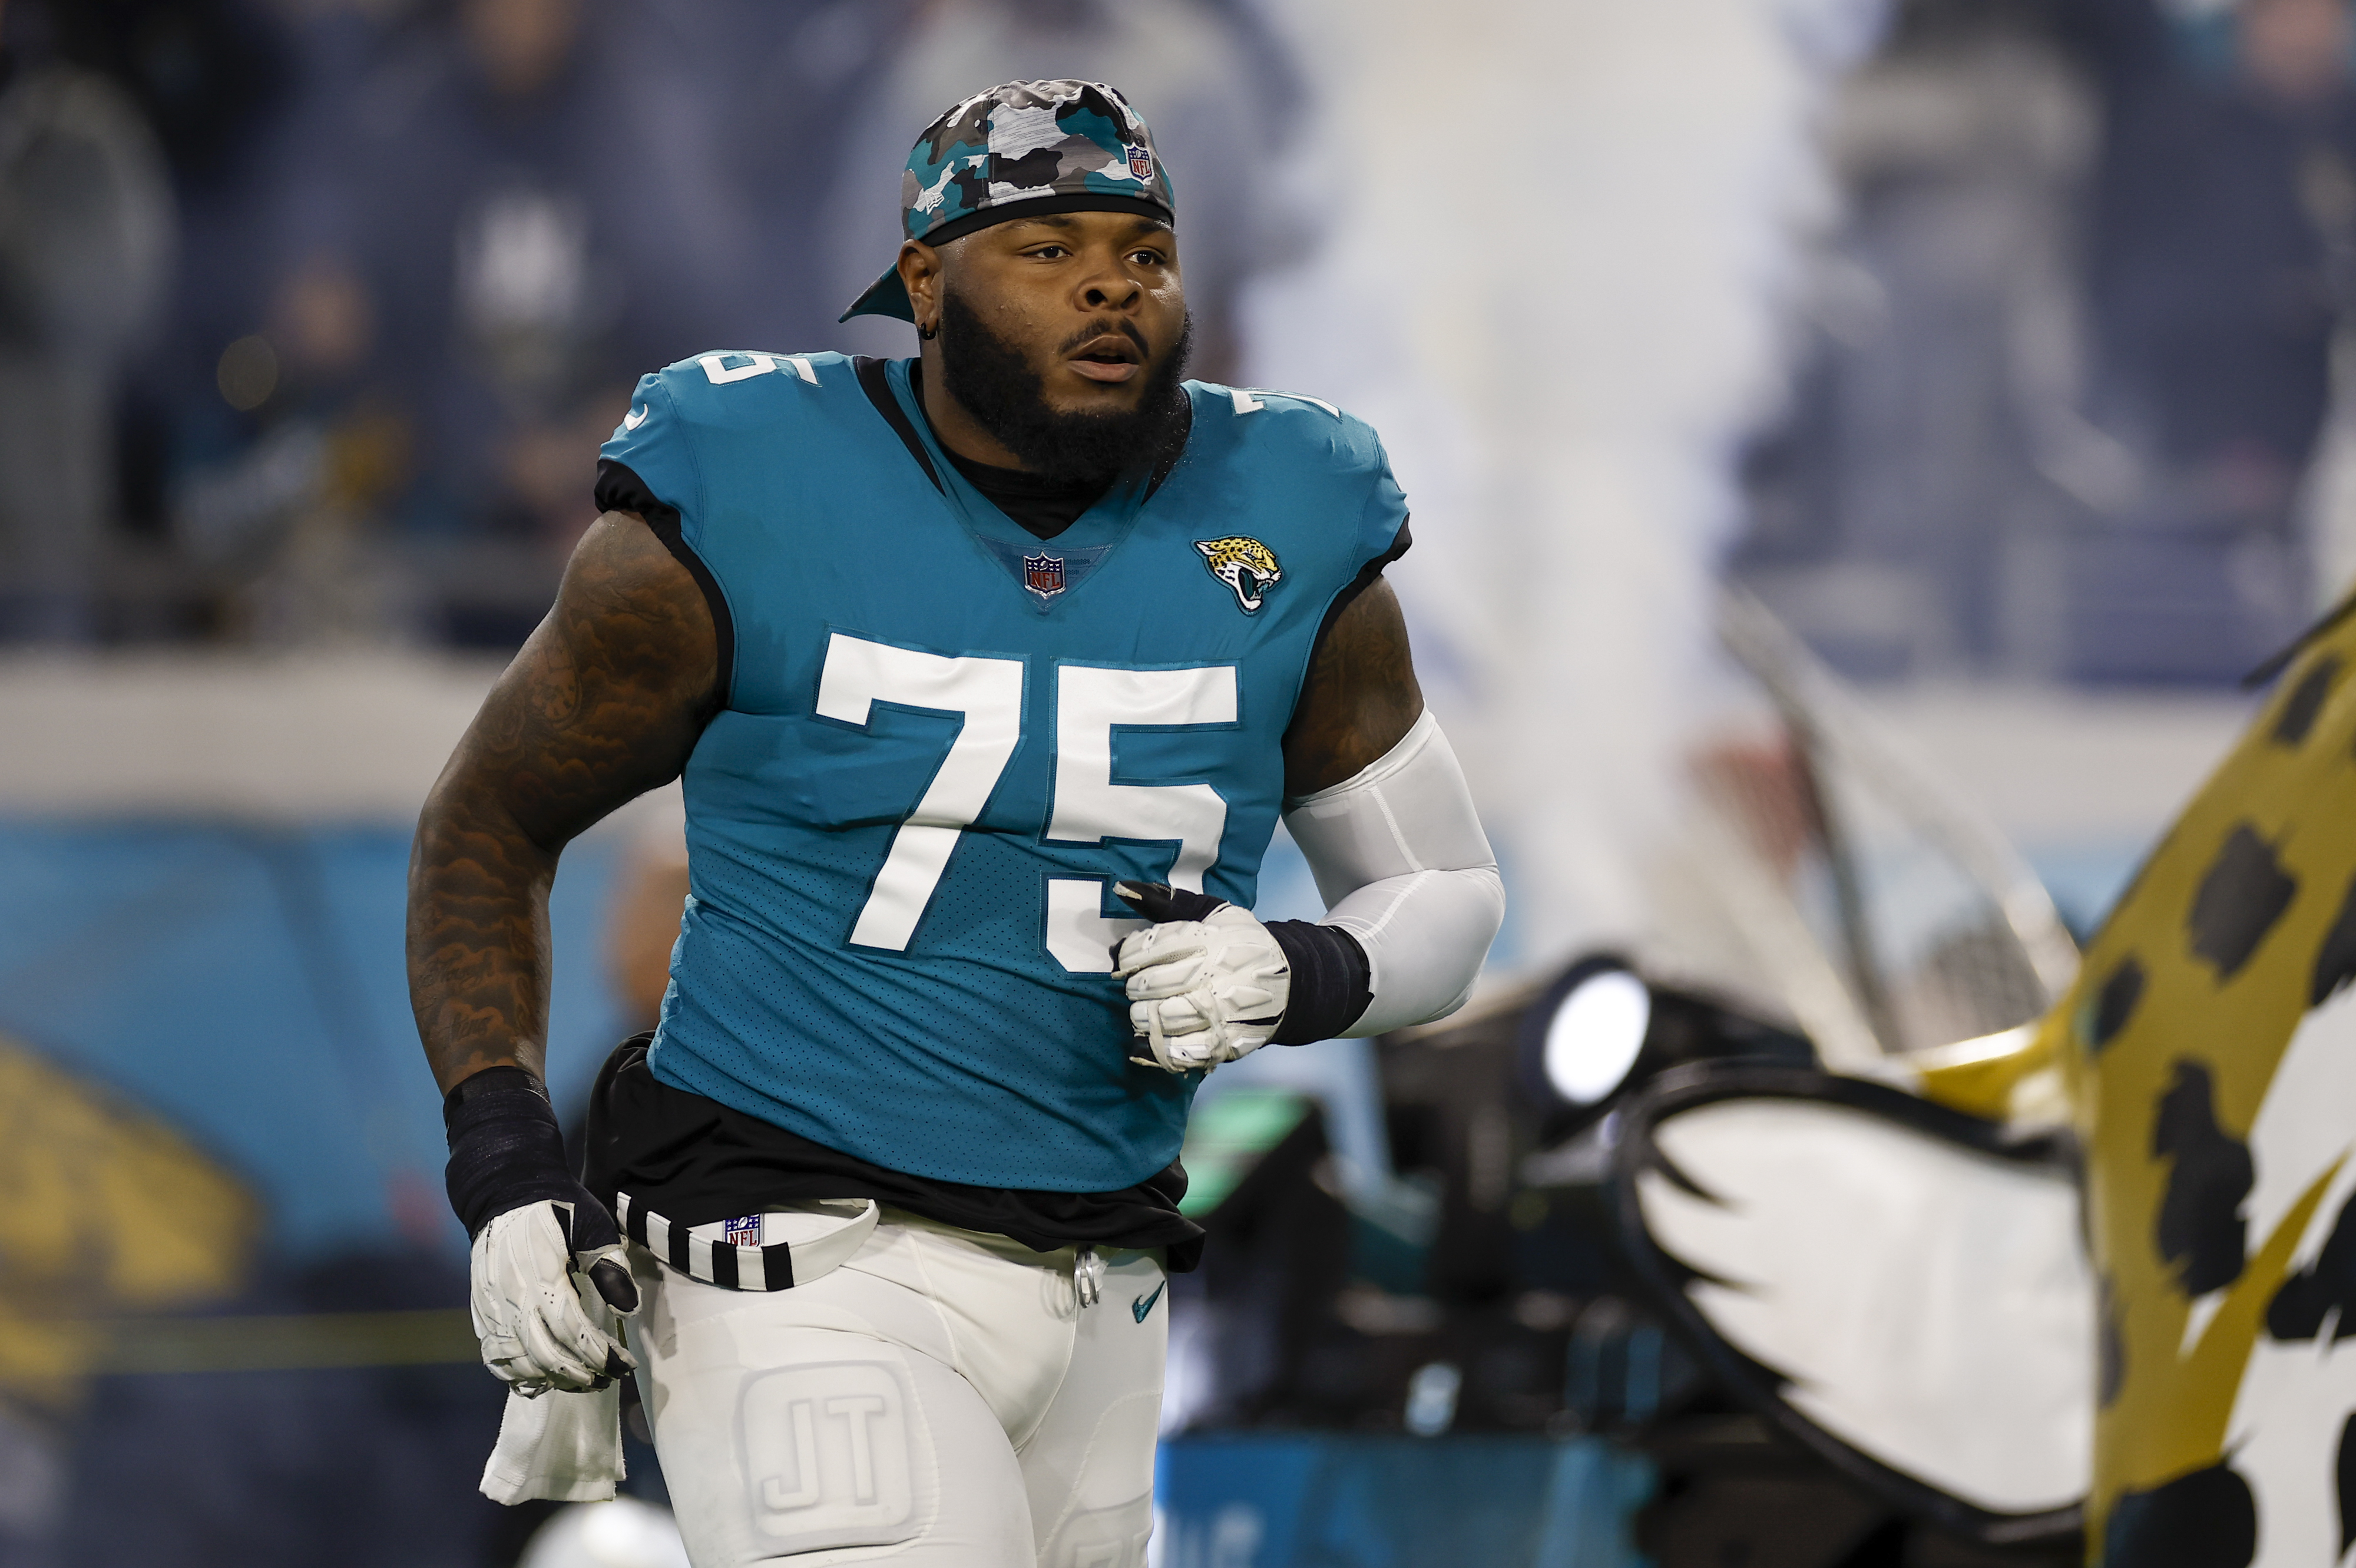 Offensive tackle Jawaan Taylor of the Jacksonville Jaguars looks on in the game against the Los Angeles Chargers at TIAA Bank Field in Jacksonville, Florida, January 14, 2023. /CFP